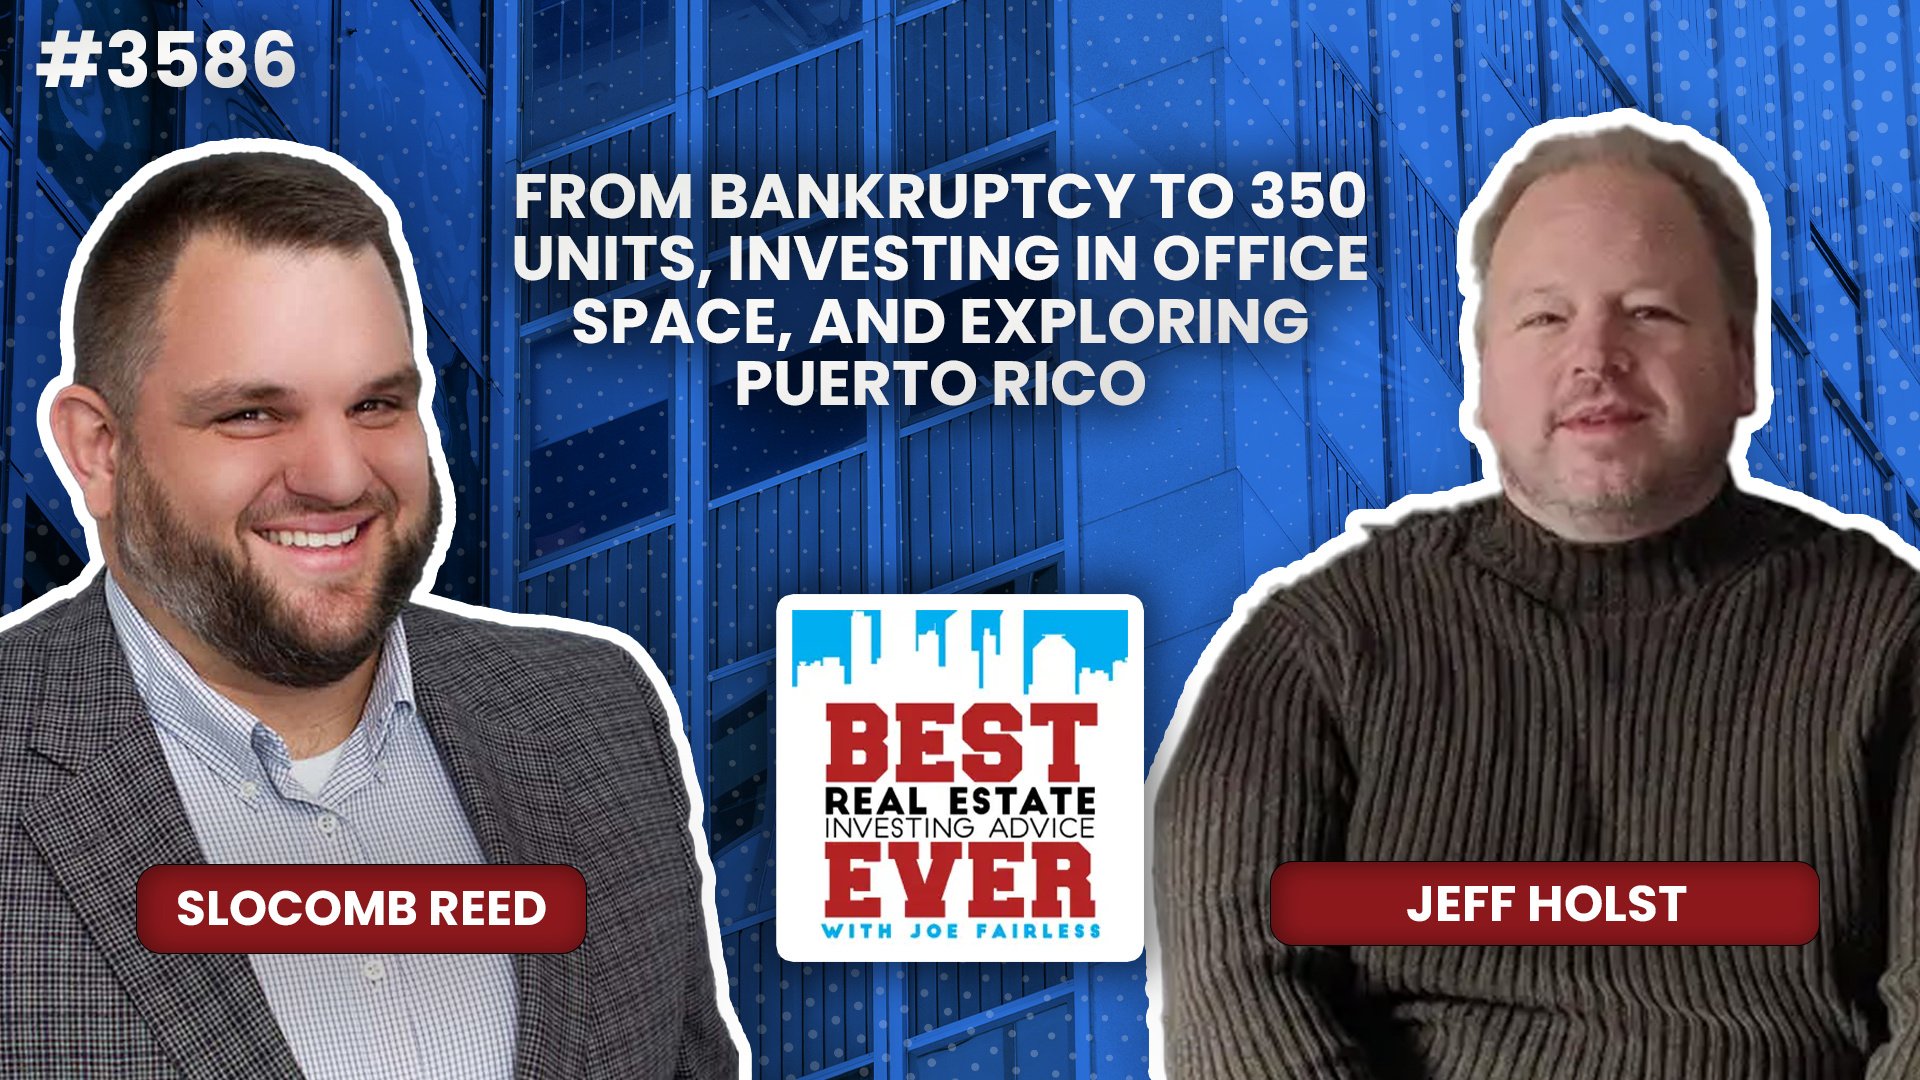 JF3586: From Bankruptcy to 350 Units, Investing in Office Space, and Exploring Puerto Rico ft. Jeff Holst